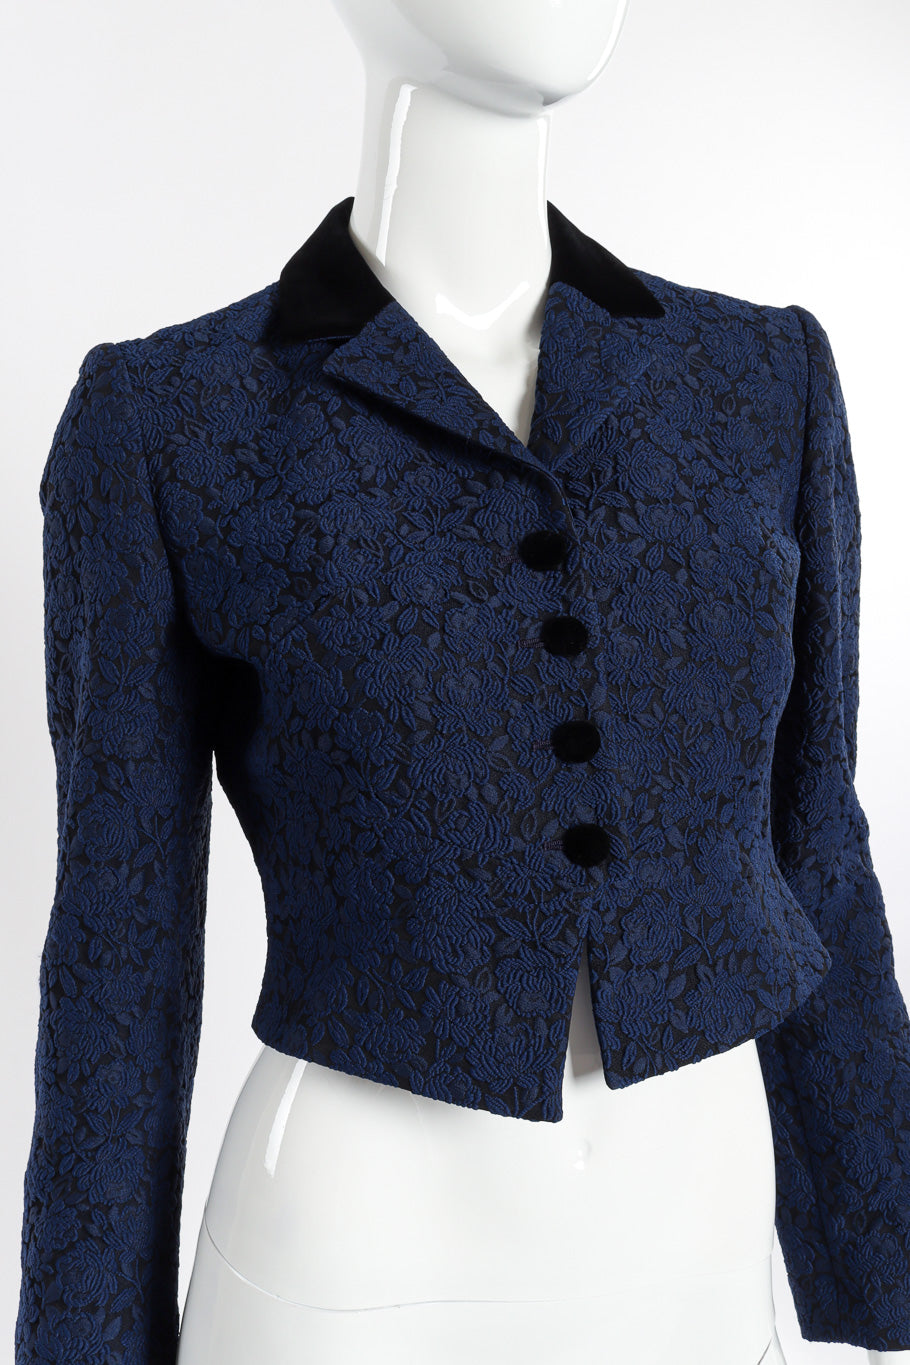 Cropped Floral Brocade Blazer by Moschino on mannequin front close @recessla